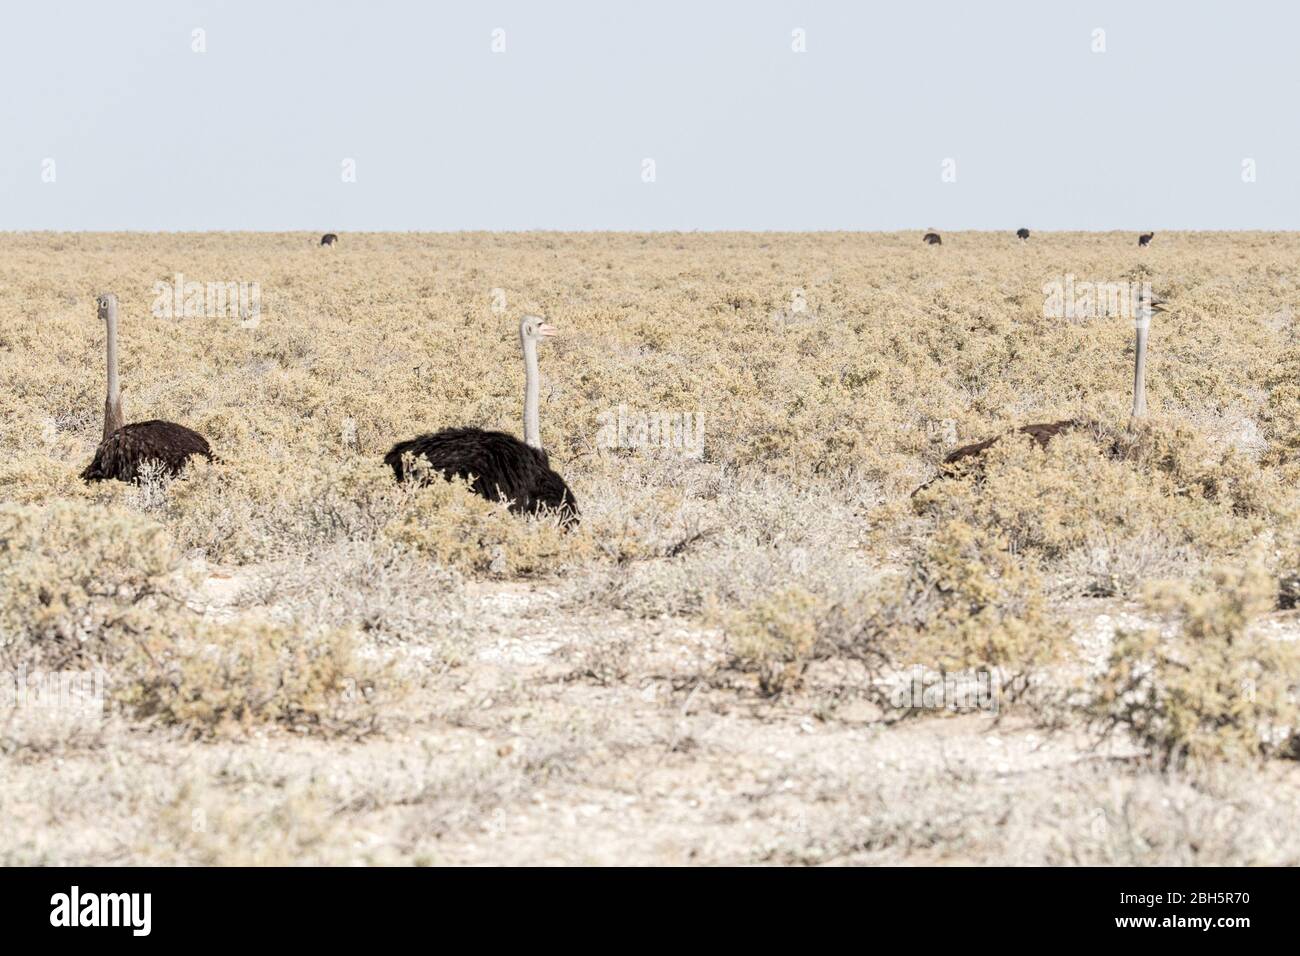 Male & Female Ostriches sitting as part of a flock, cooling with beaks open, Etosha National Park, Namibia, Africa Stock Photo